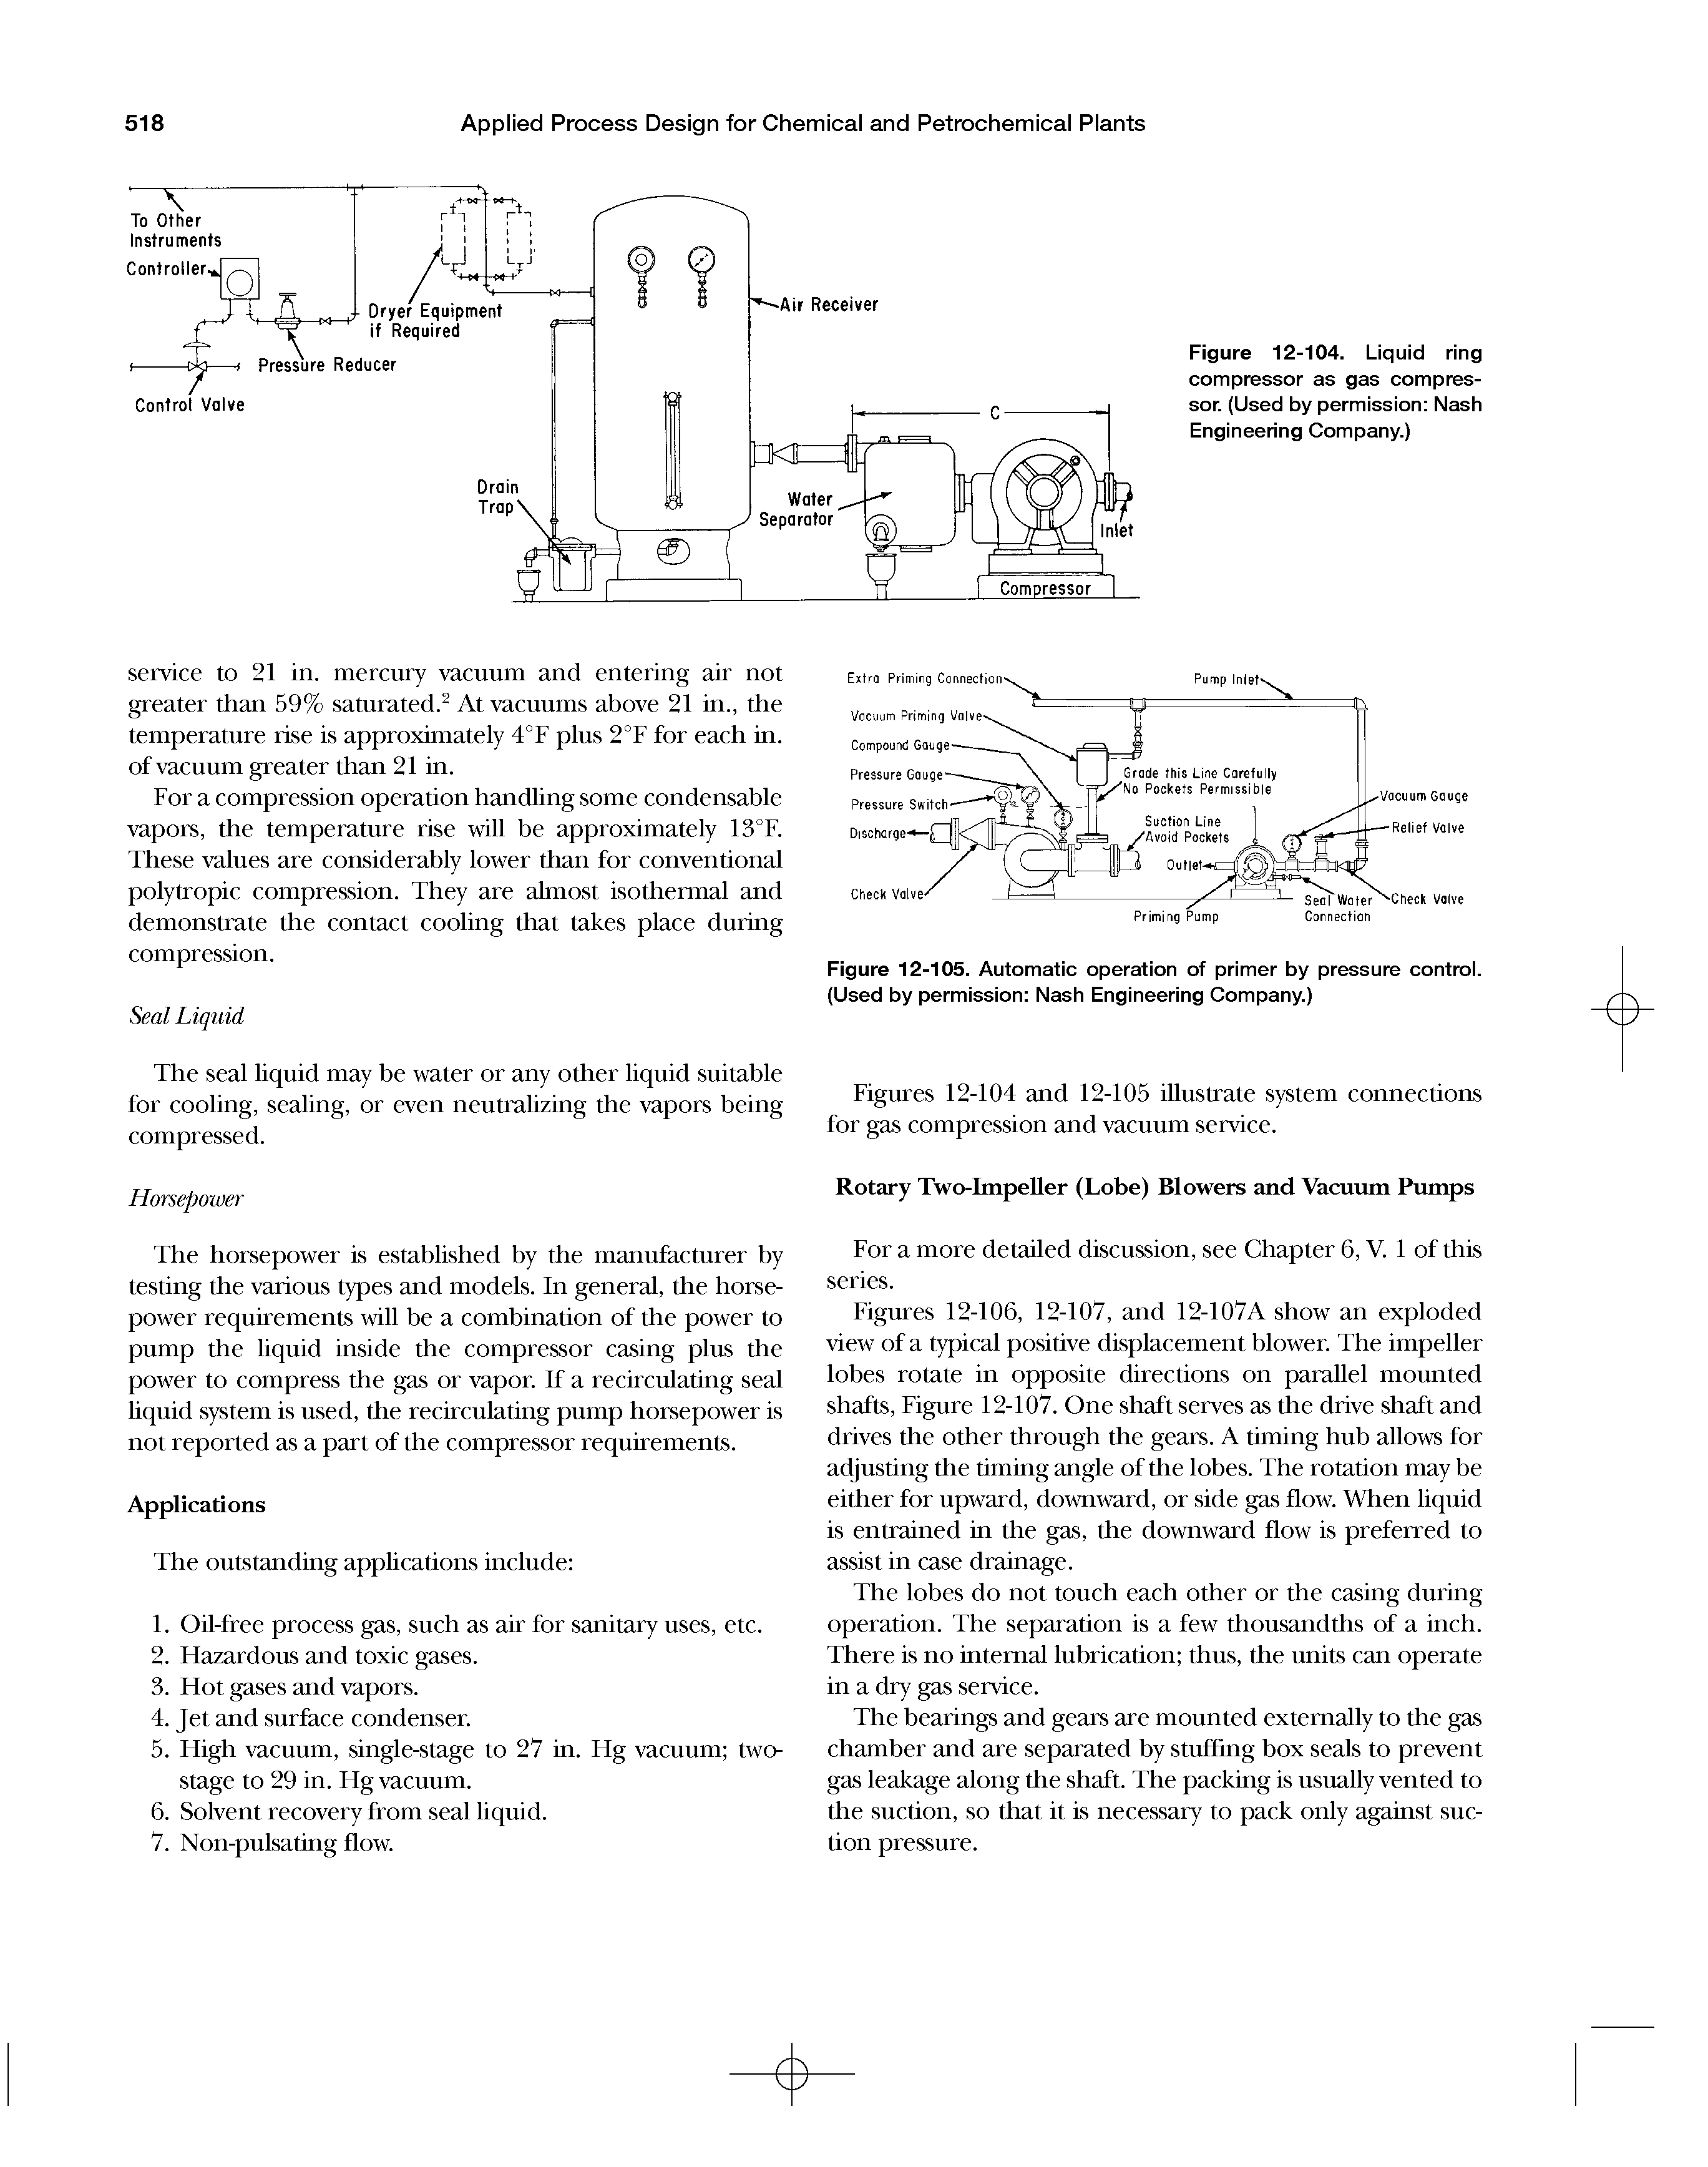 Figures 12-104 and 12-105 illustrate system connections for gas compression and vacuum service.